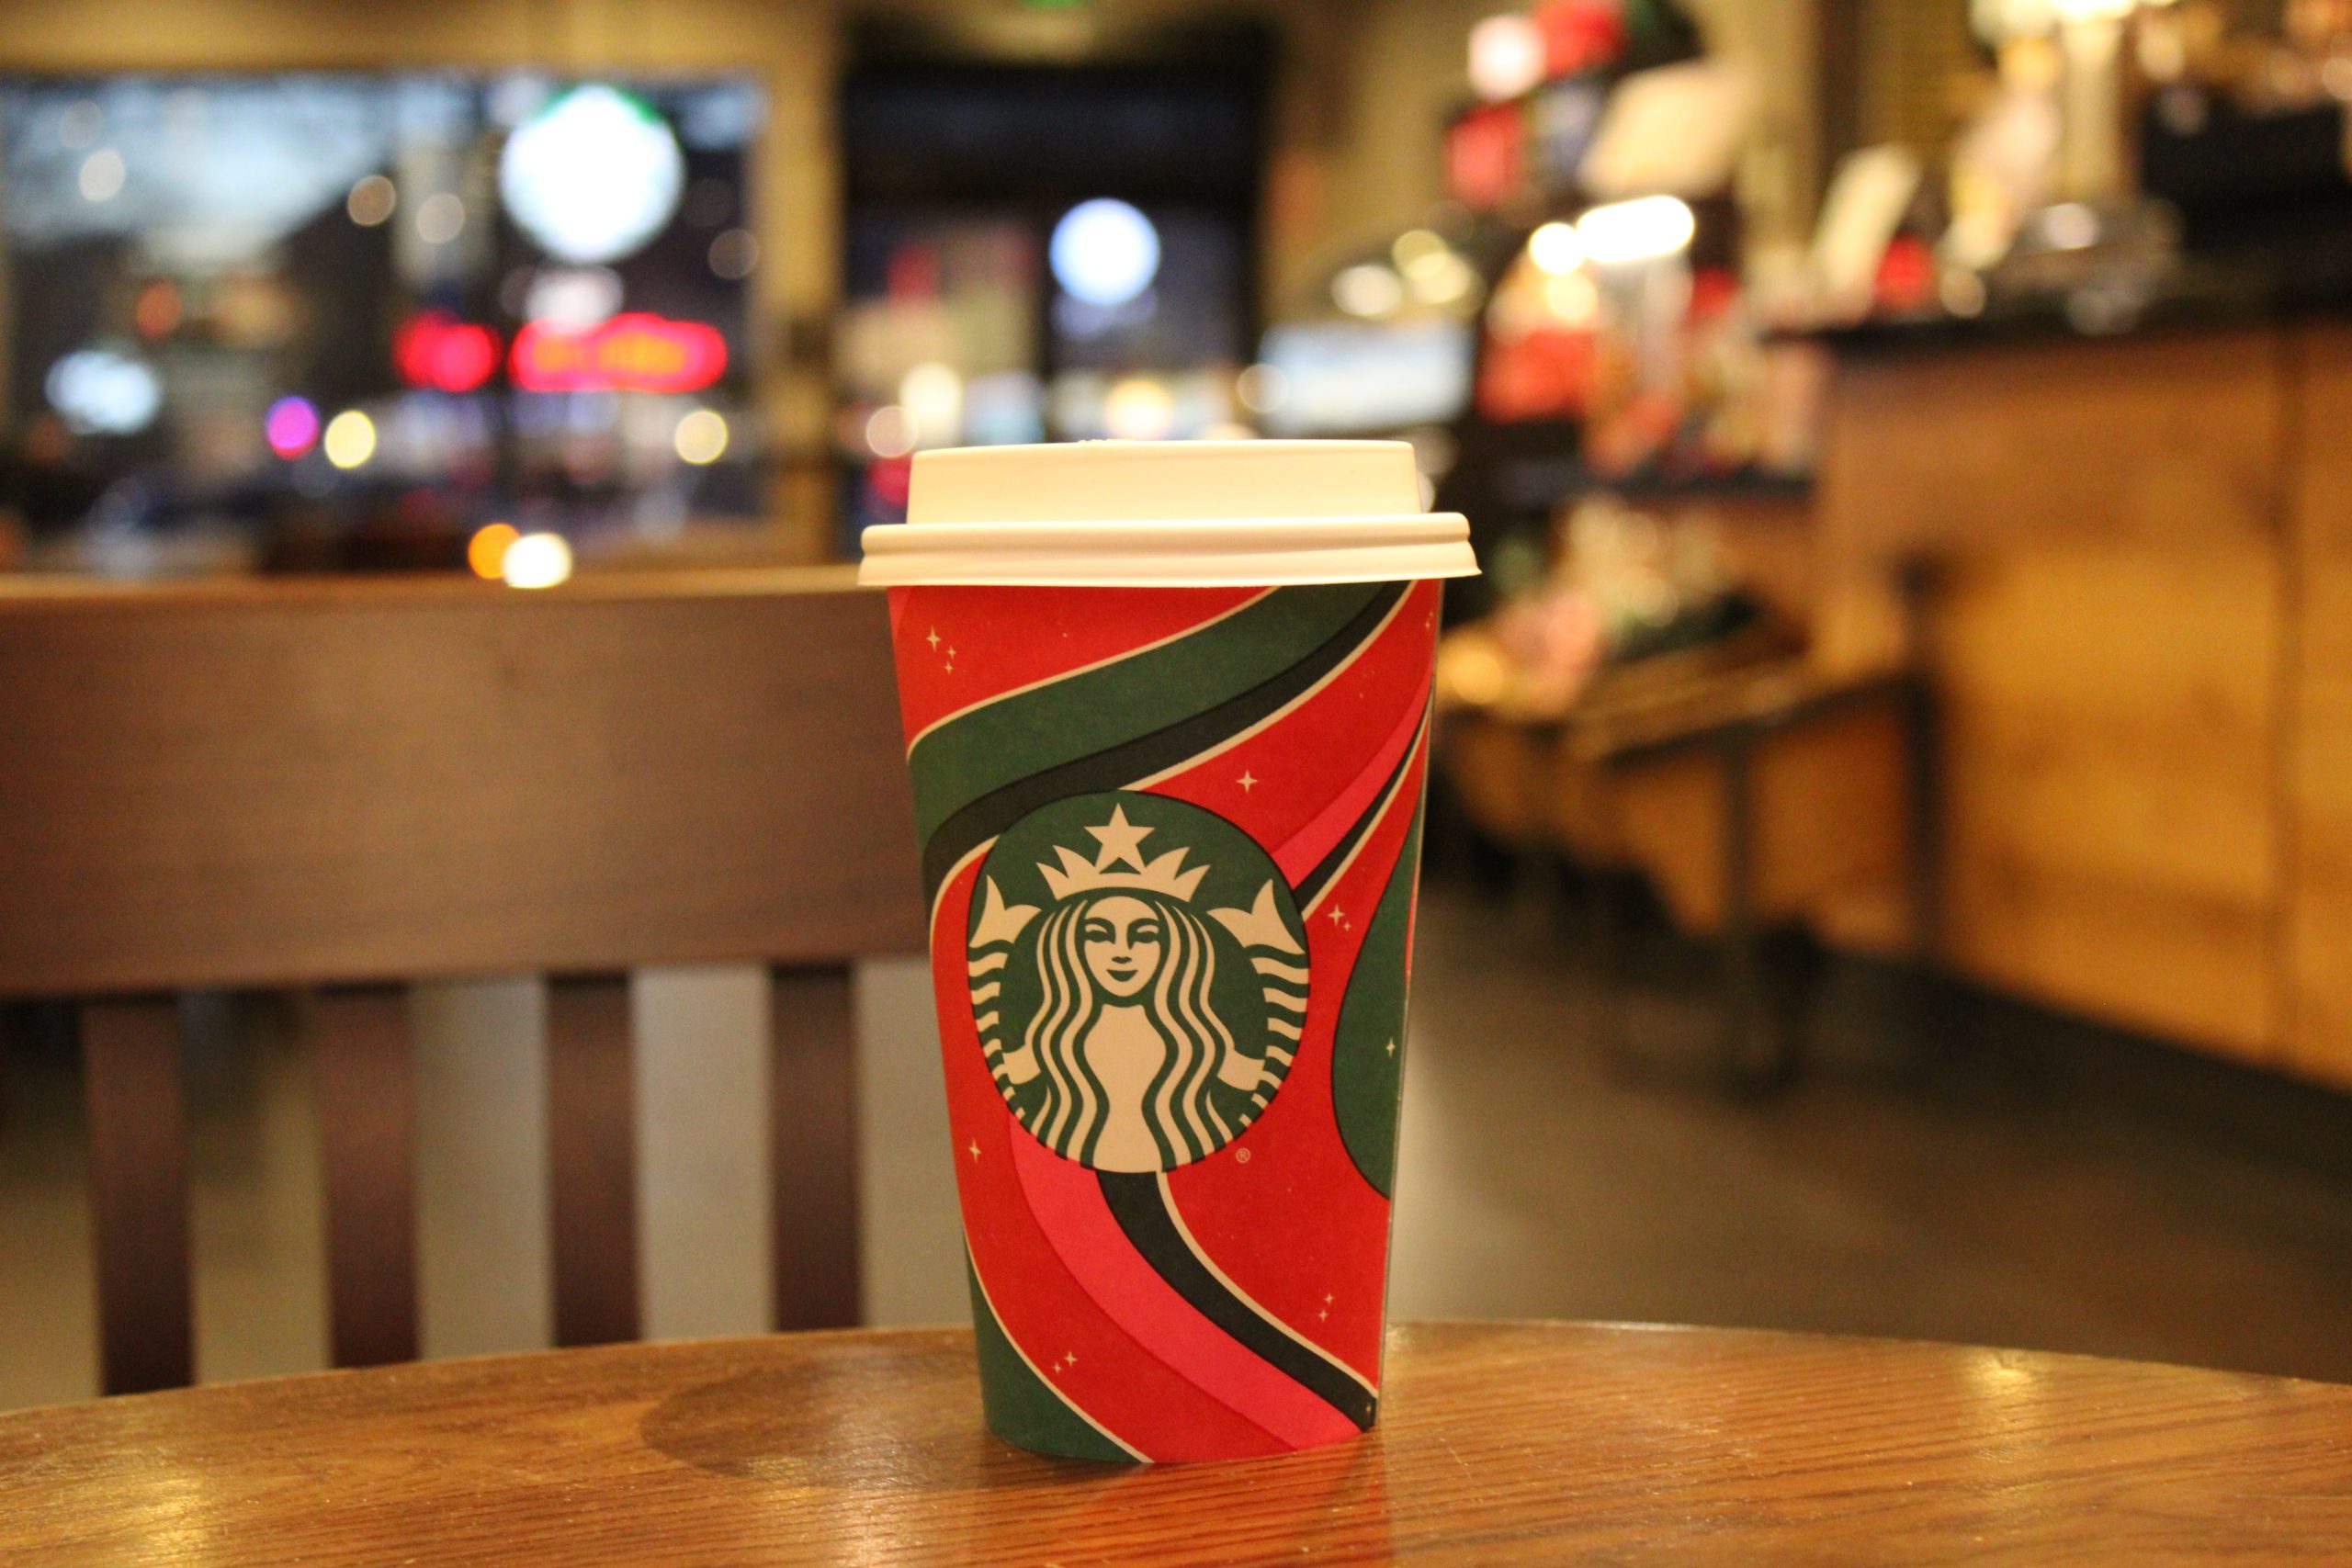 The holiday-themed Starbucks cup is a hallmark of the season.